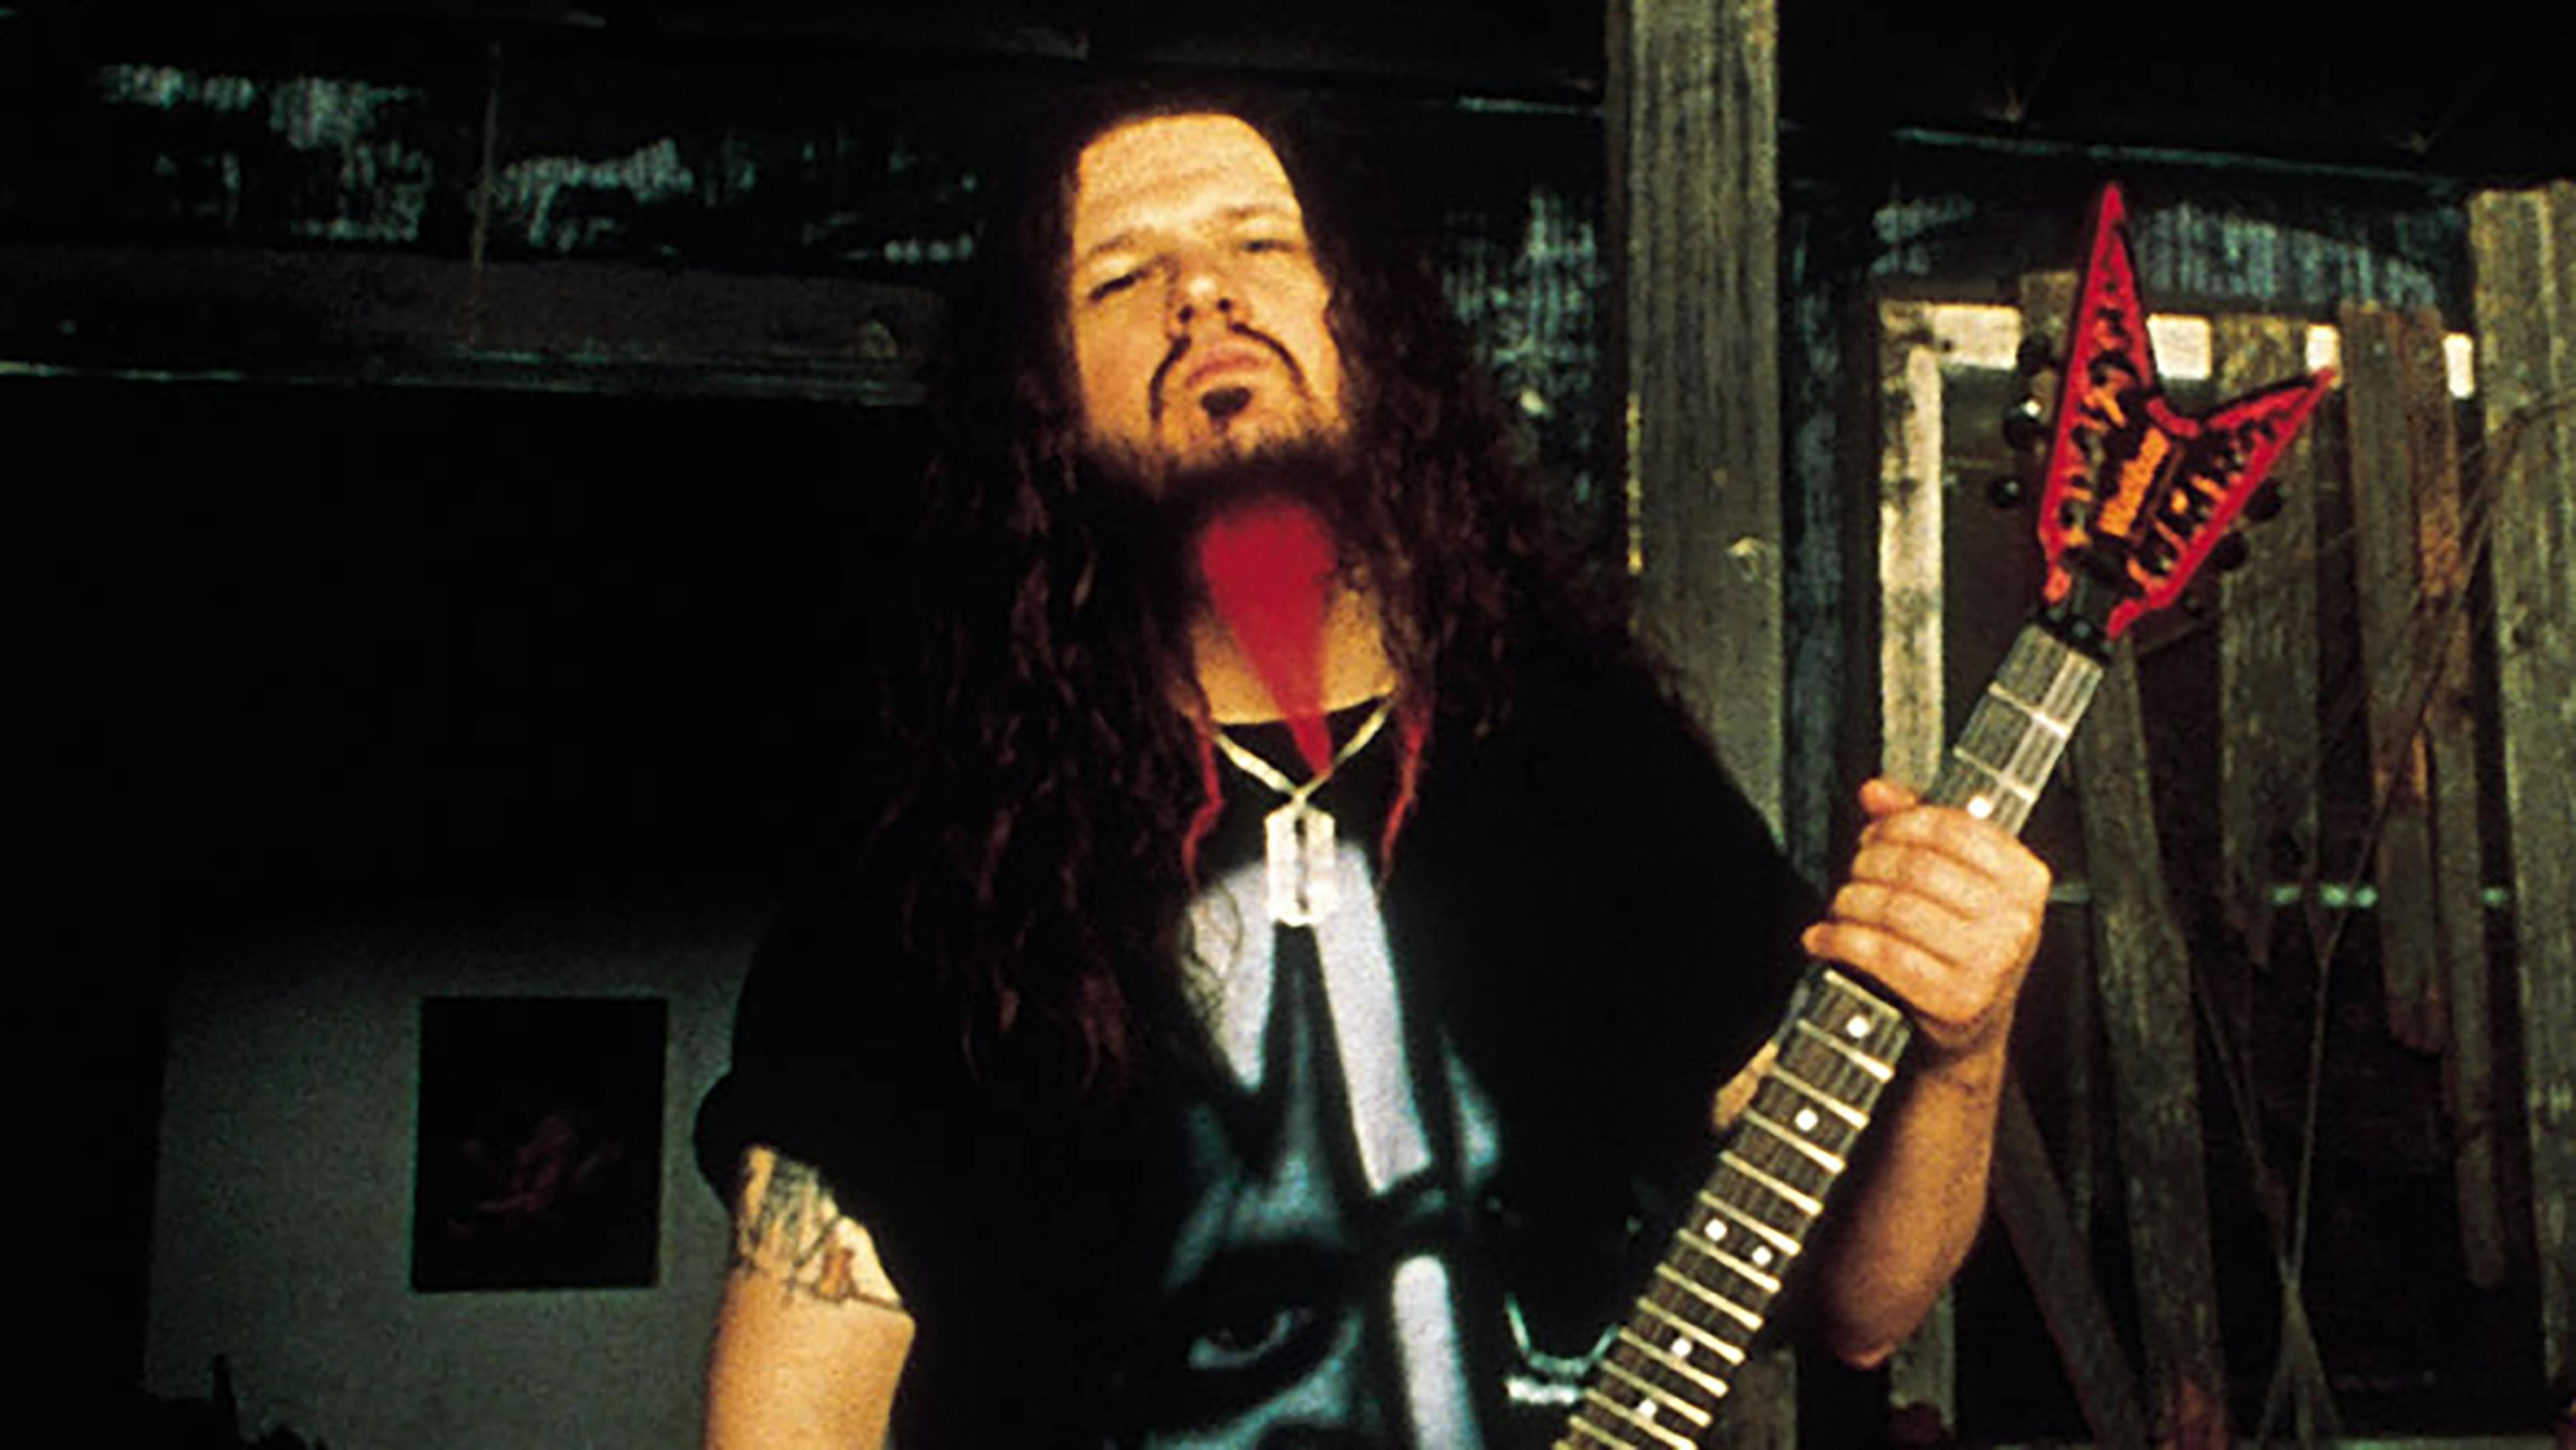 Backstage bust-ups and bleeding heads: Remembering my friend, Dimebag Darrell